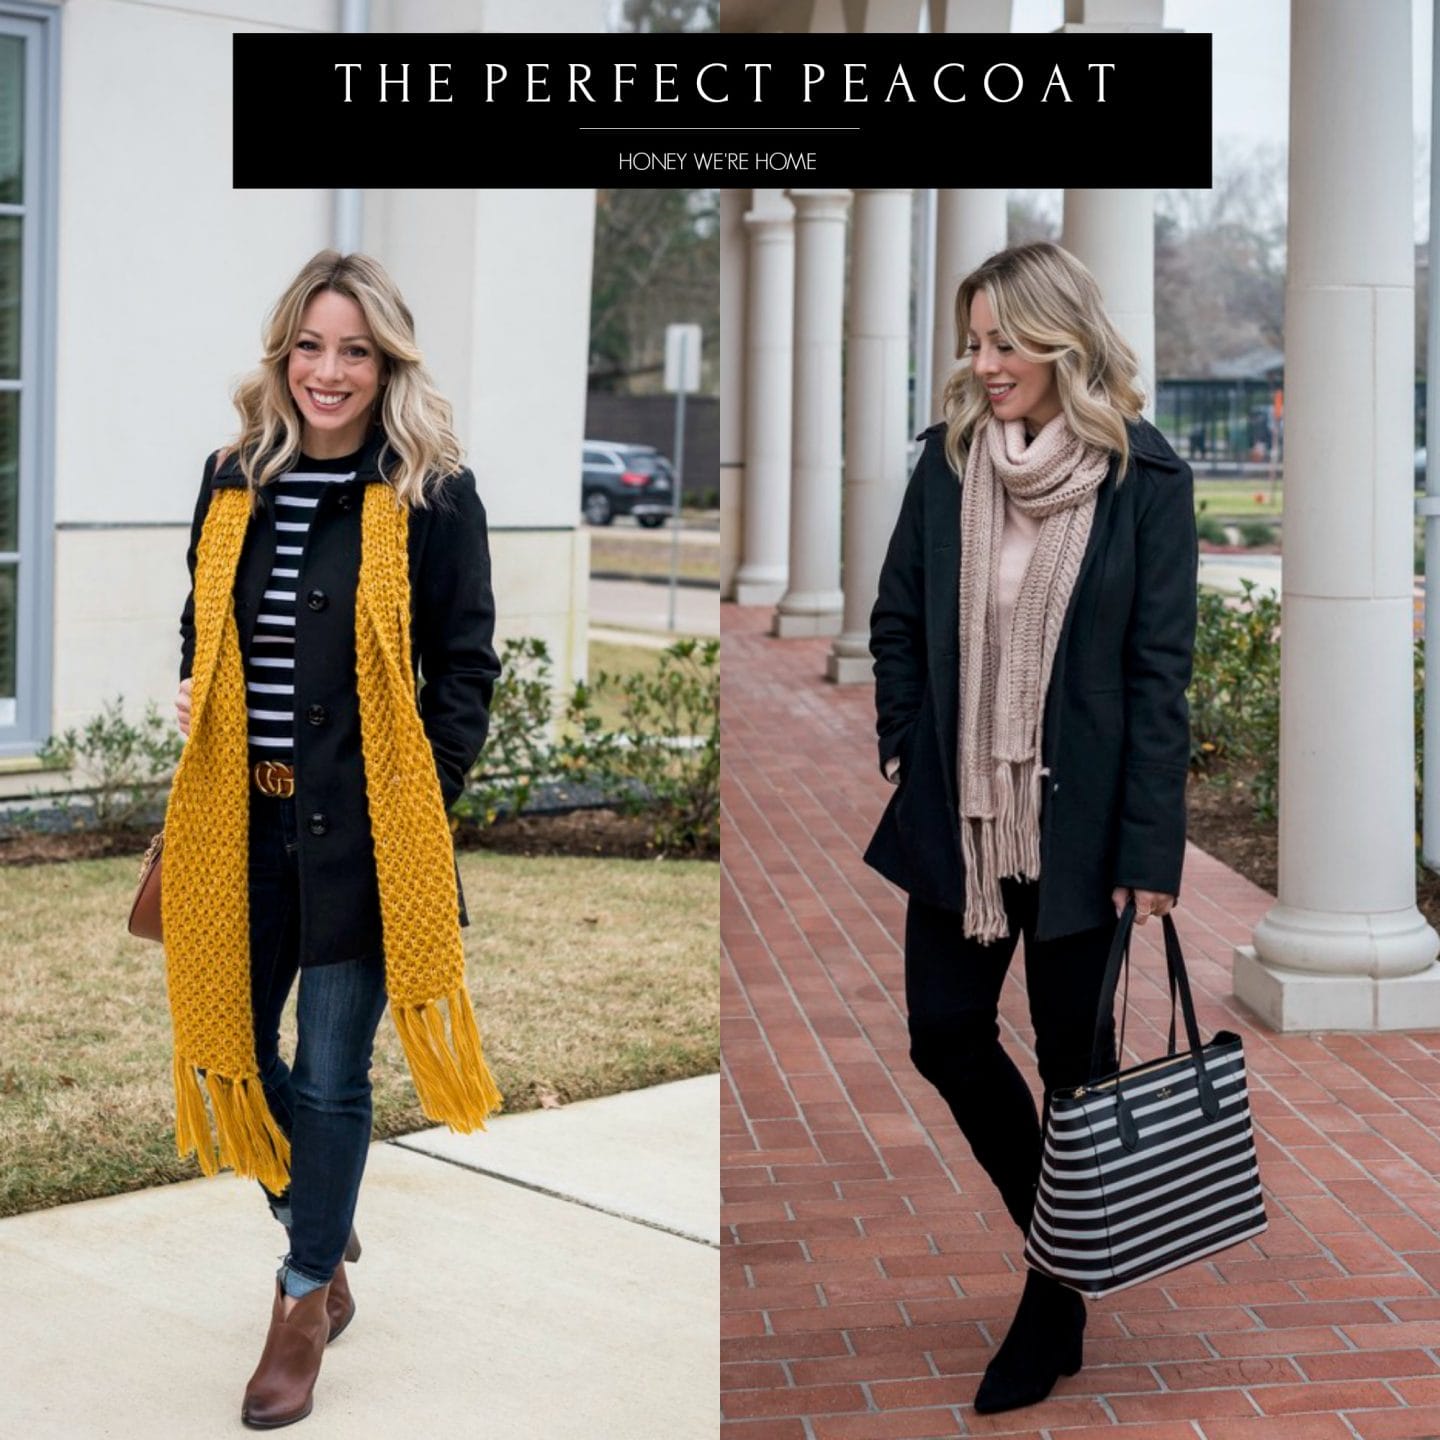 The Perfect Peacoat